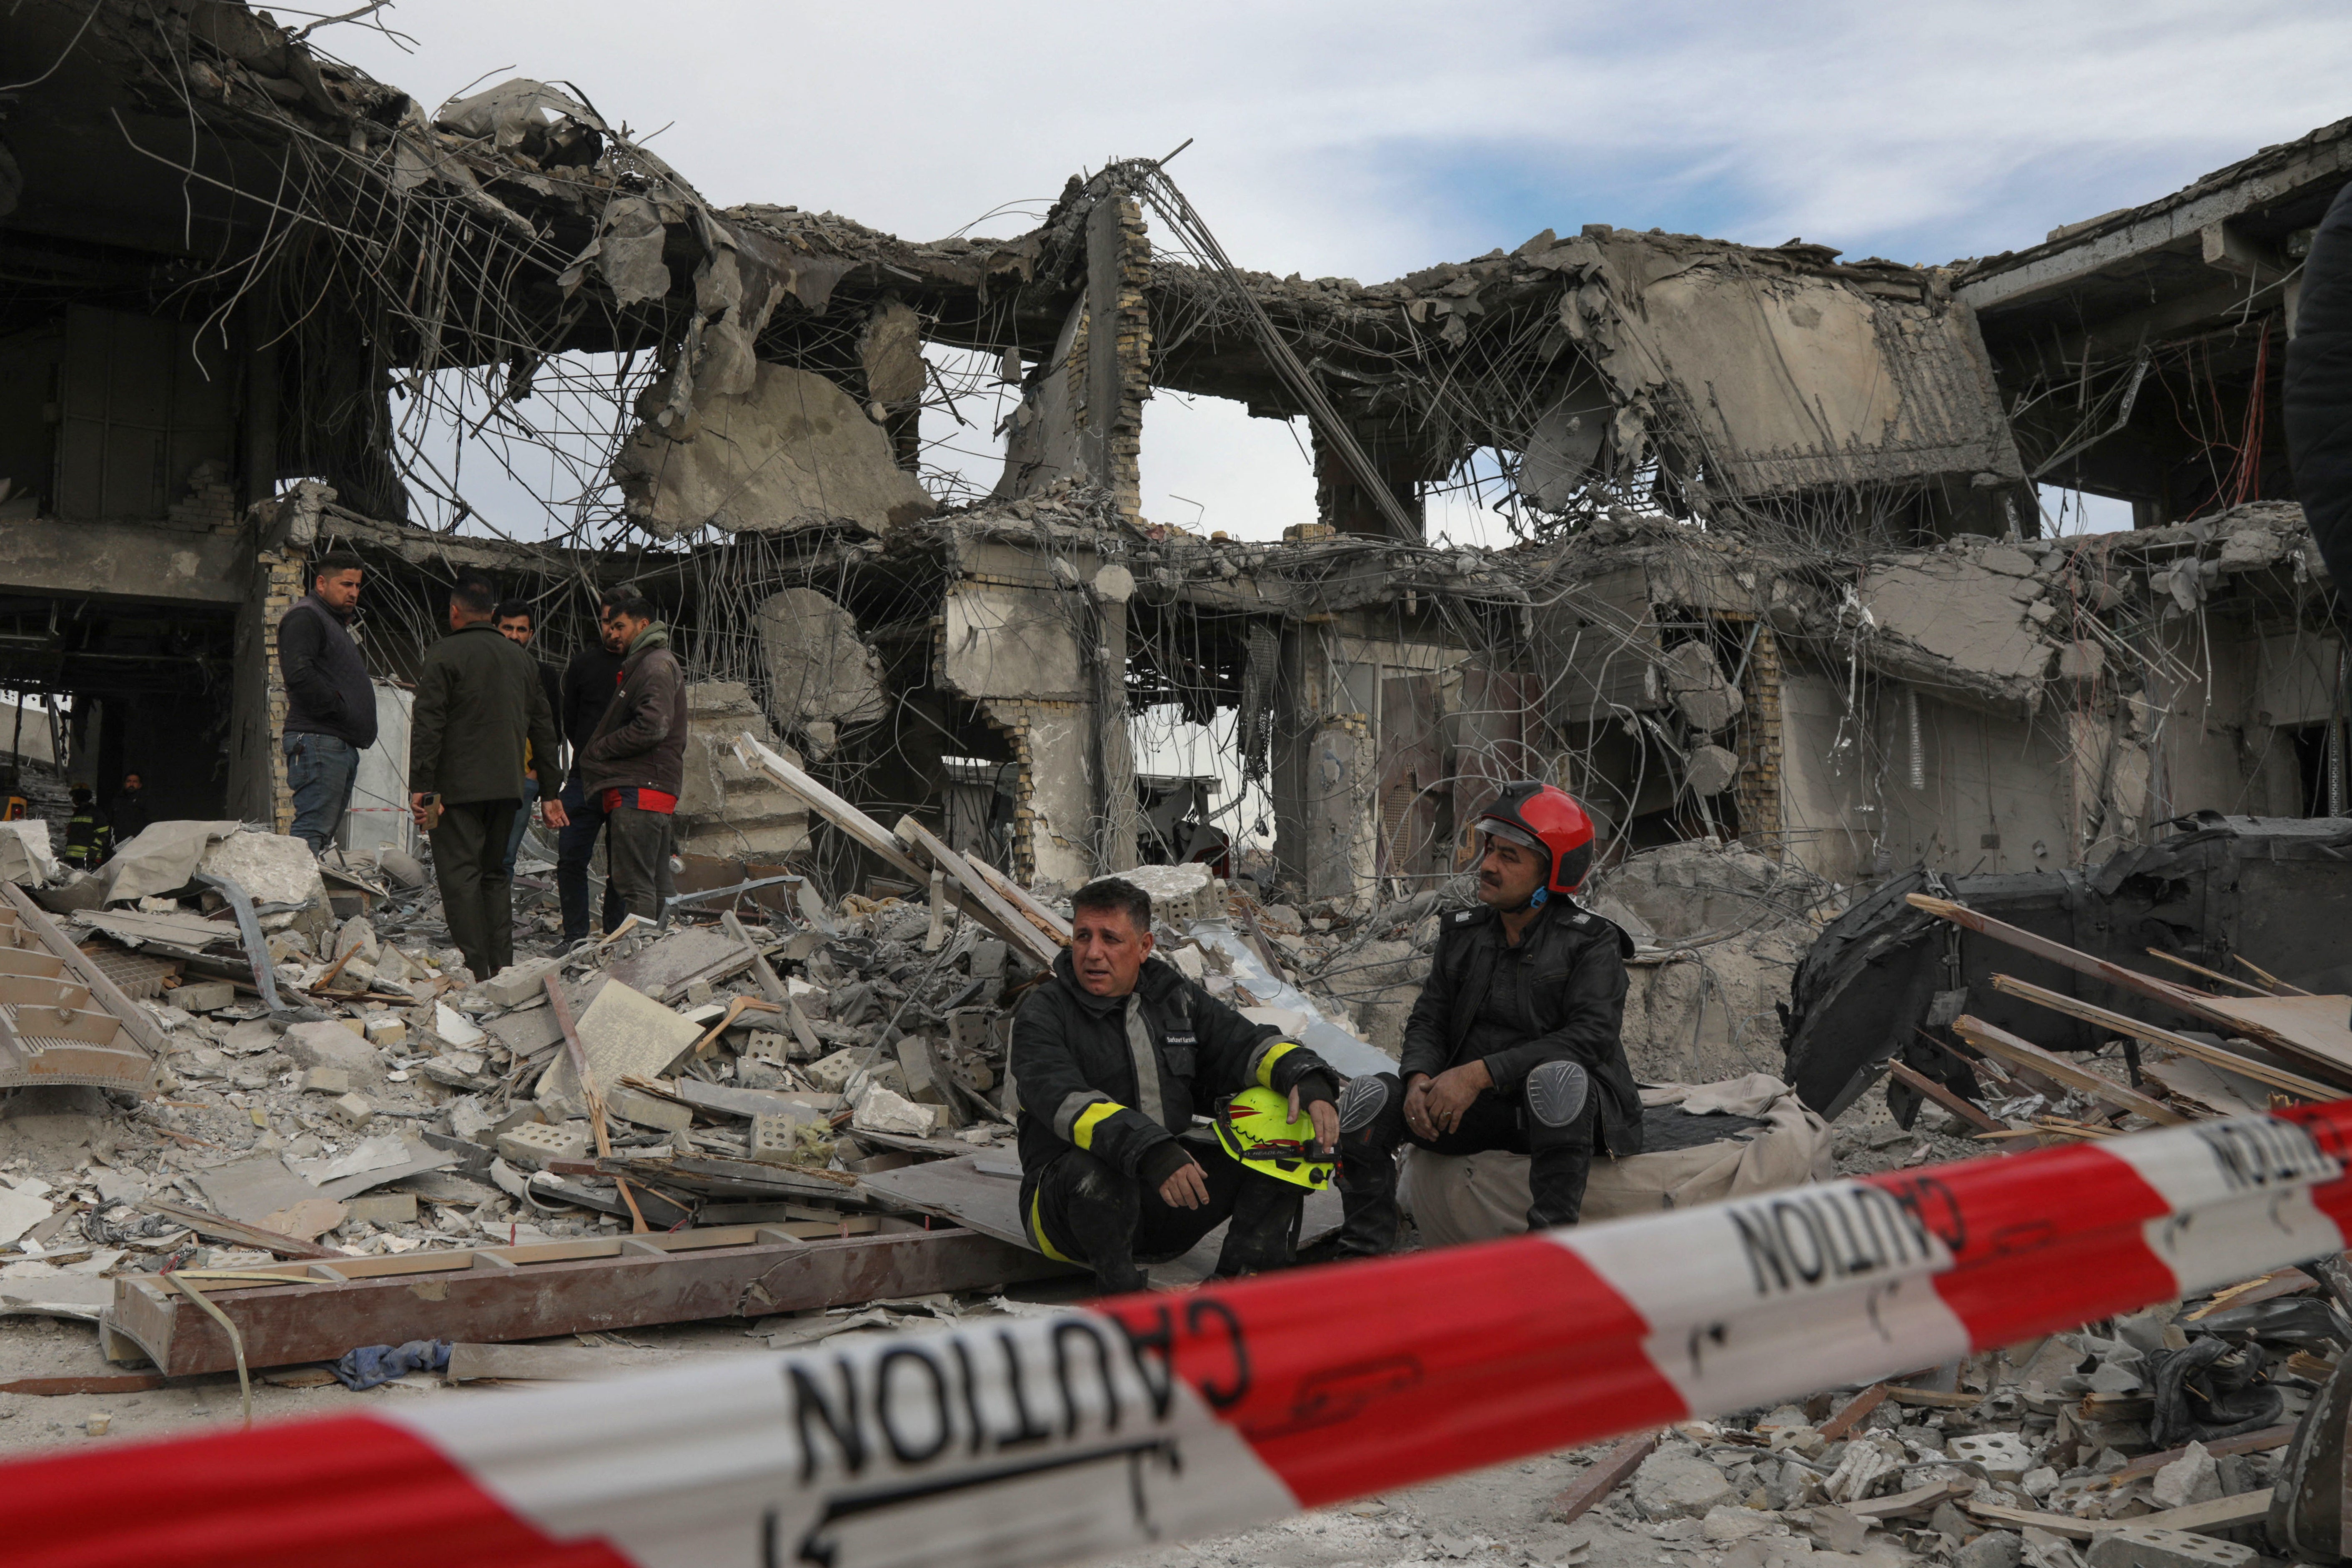 A civil defence team carries out search and rescue operations in a damaged building following a missile strike launched by the IRGC in the Kurdistan region of Iraq